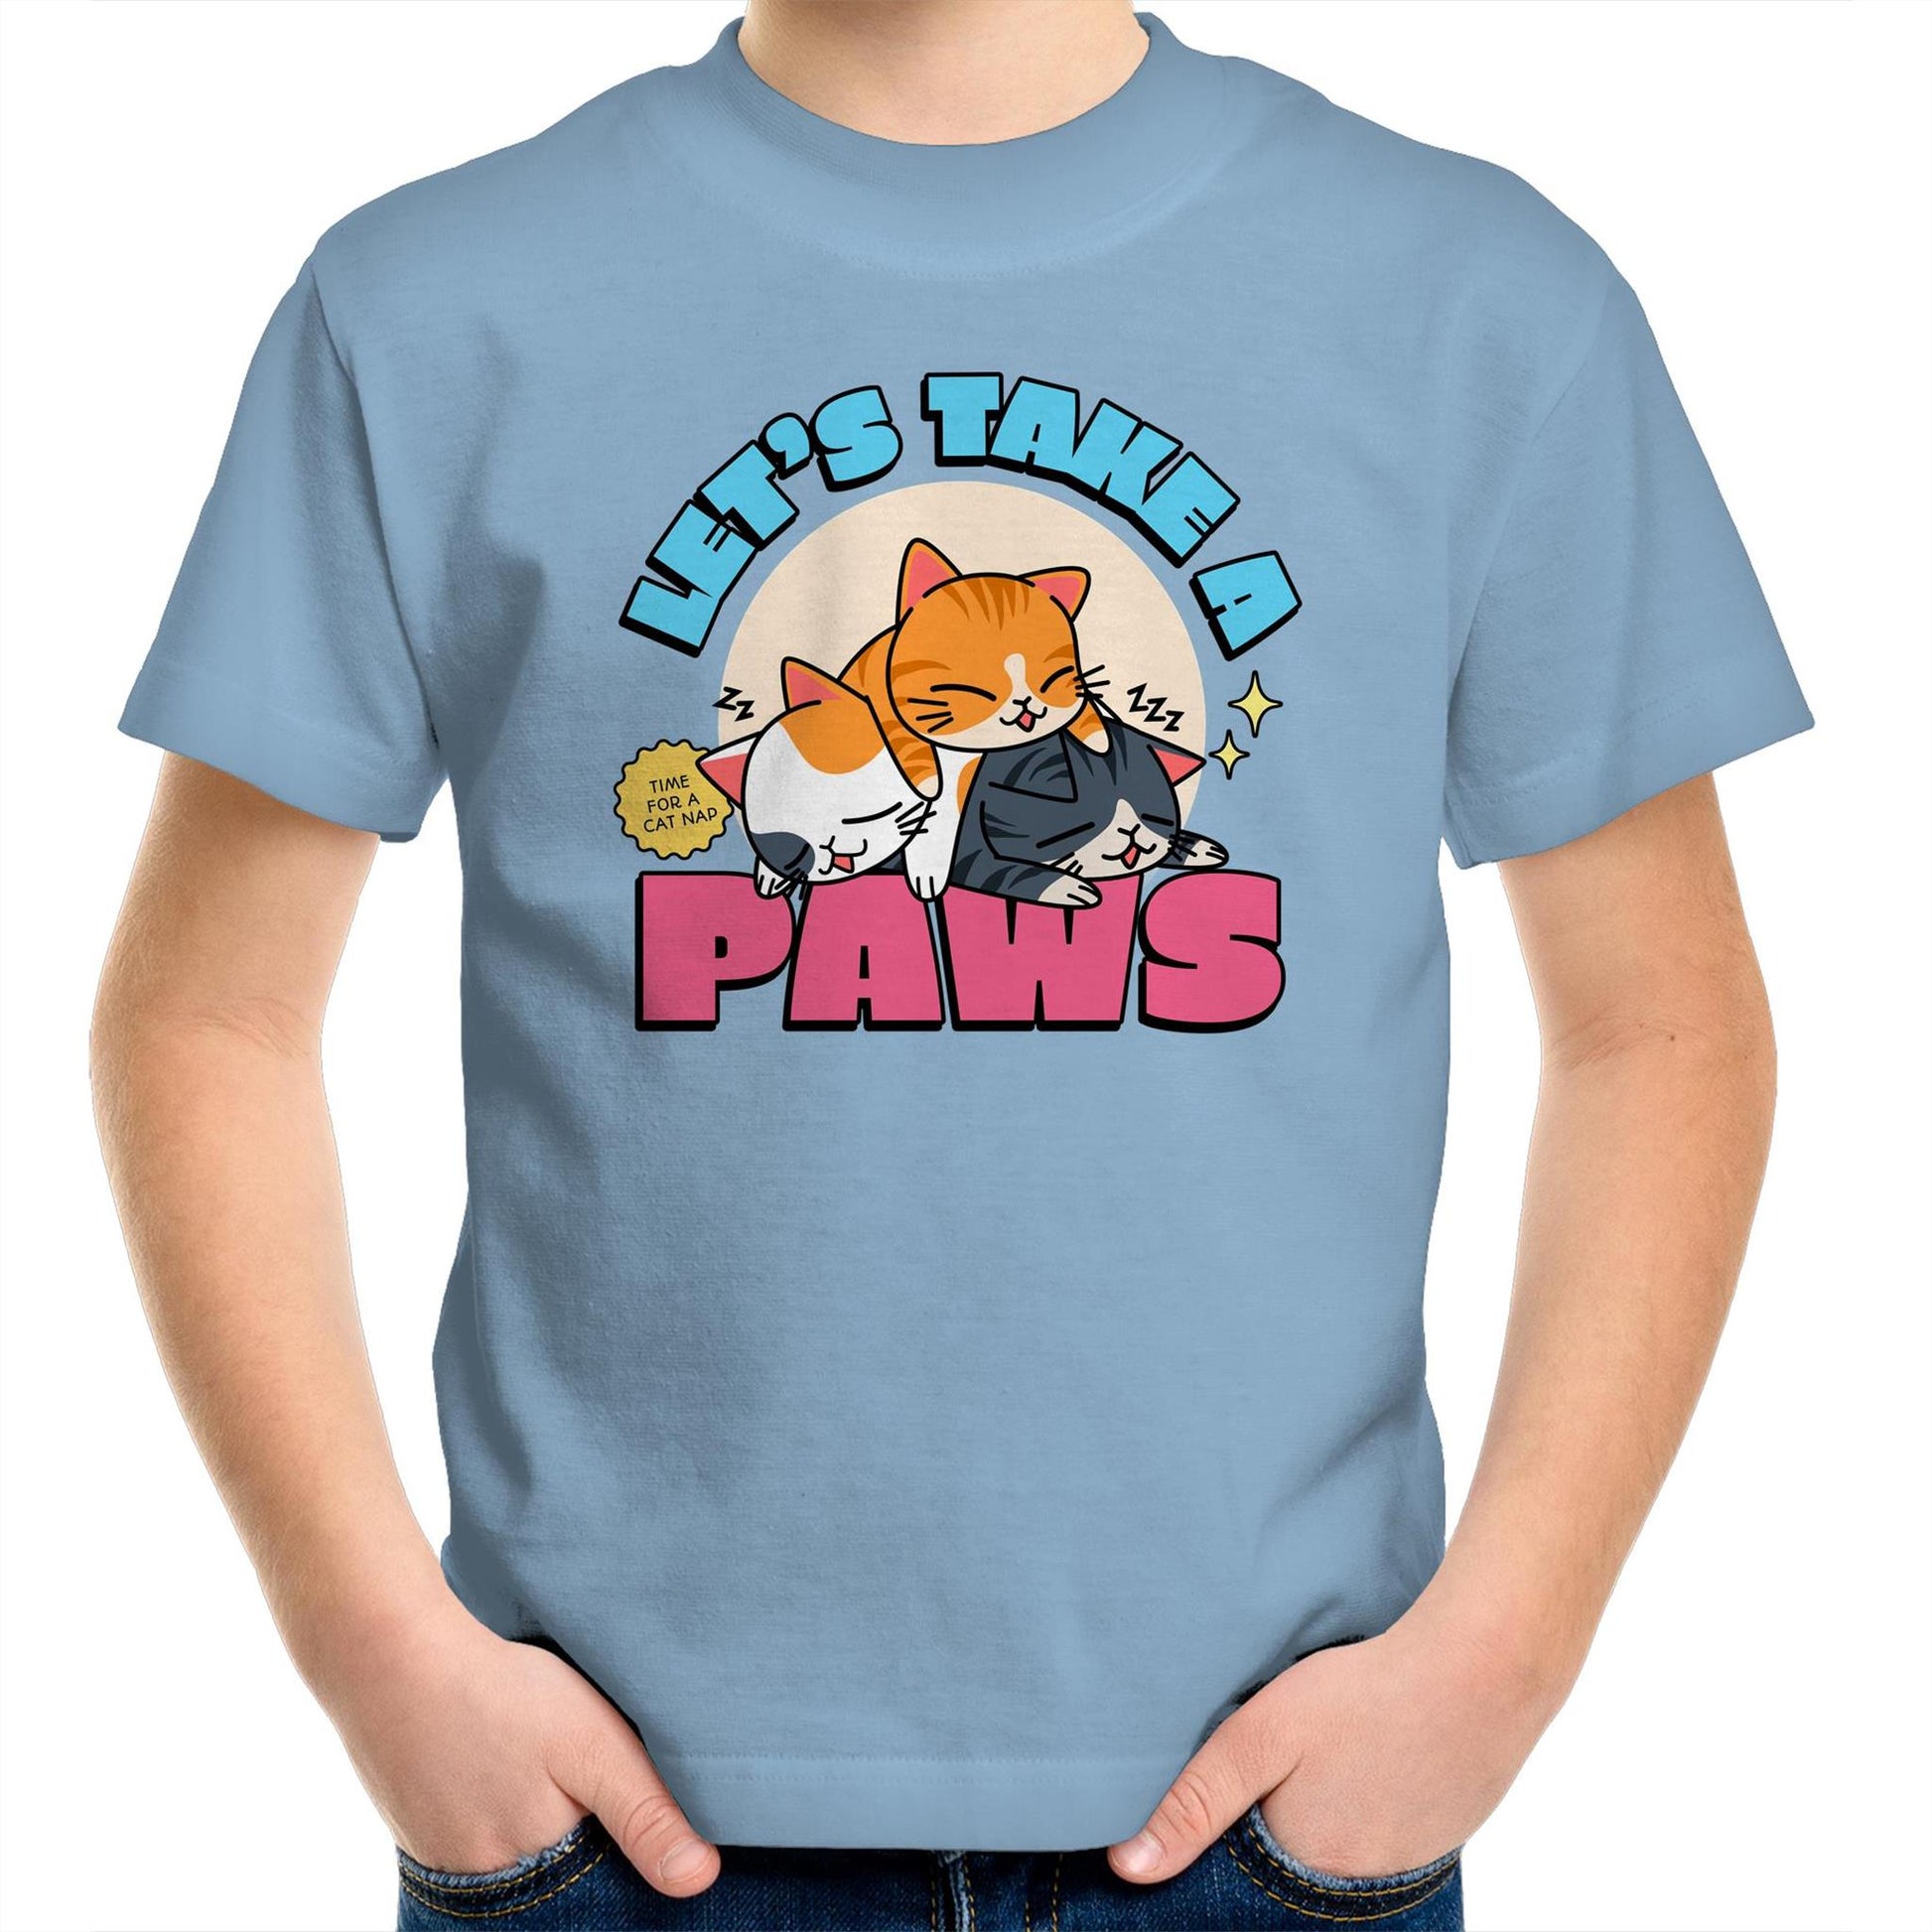 Let's Take A Pause, Time For A Cat Nap - Kids Youth T-Shirt Carolina Blue Kids Youth T-shirt animal